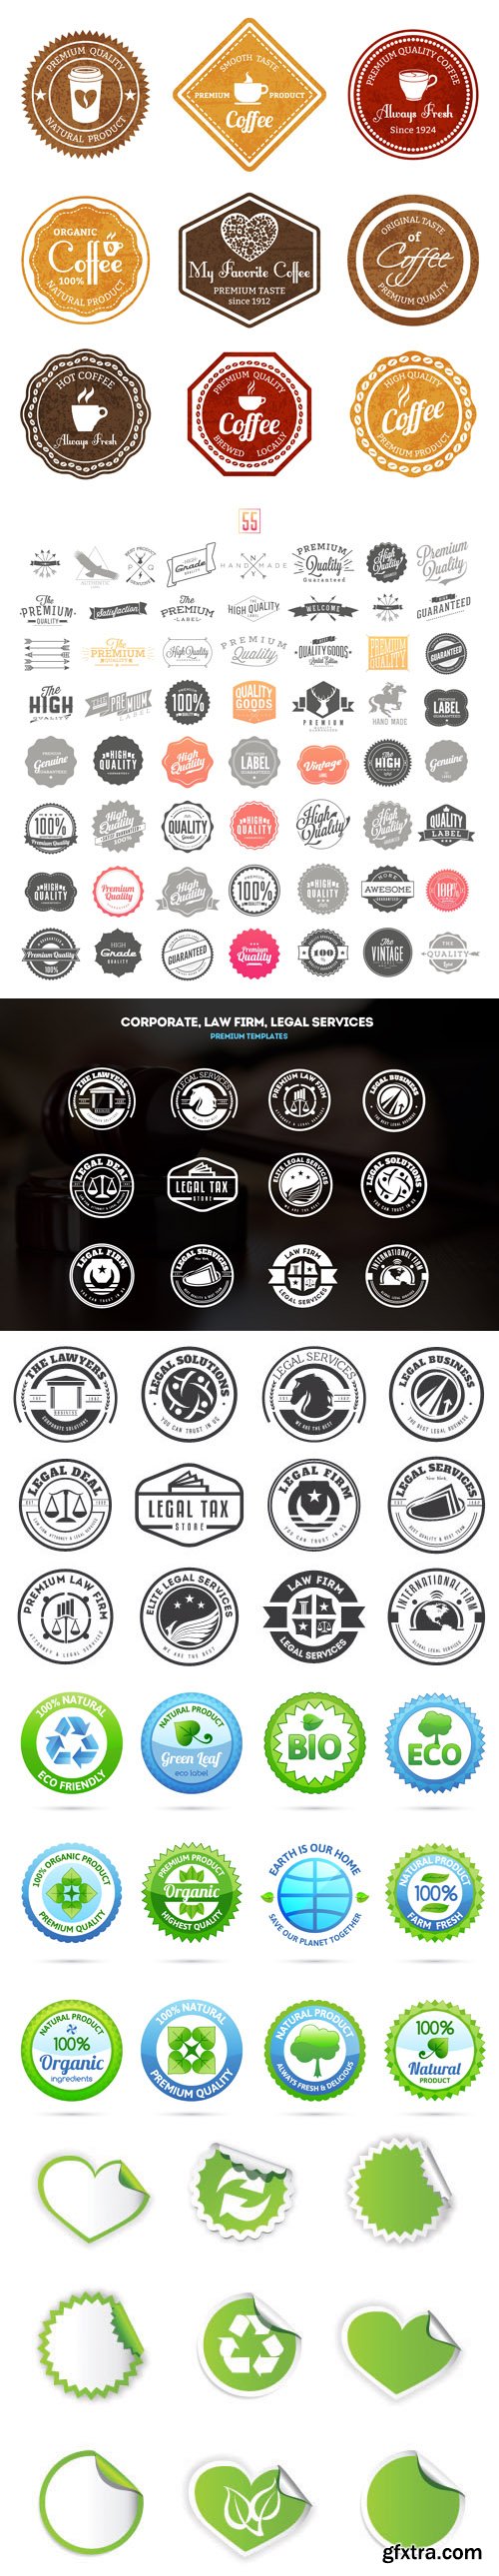 97 Premium Labels, Stickers and Logos in Vector